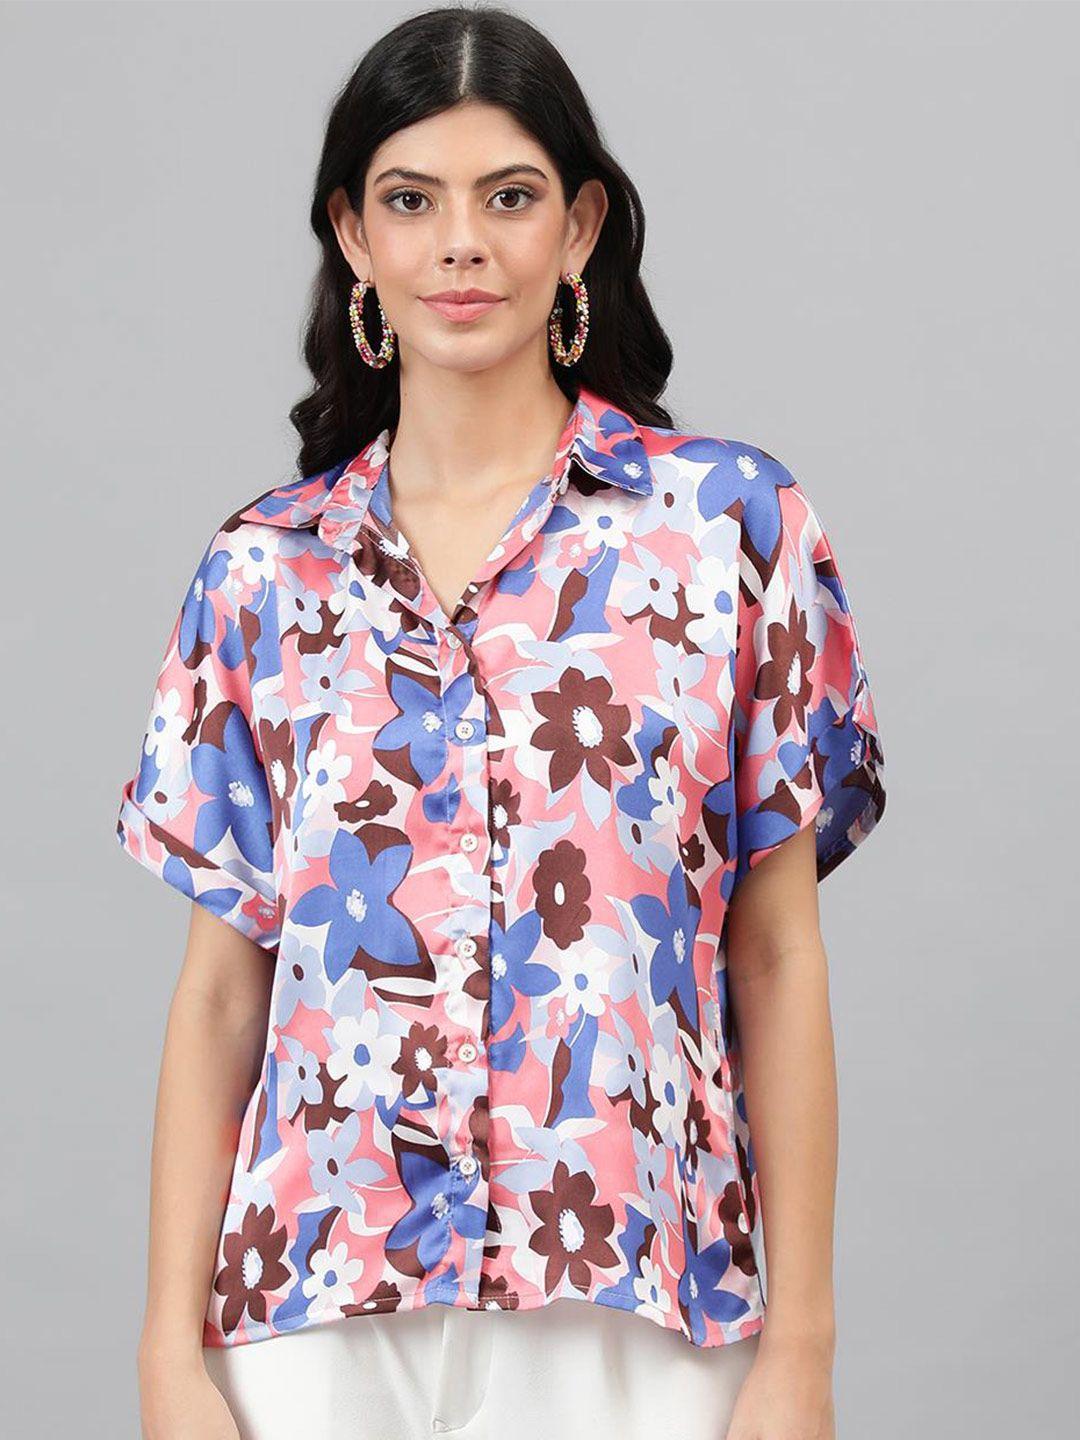 kotty white & blue floral printed satin shirt style top